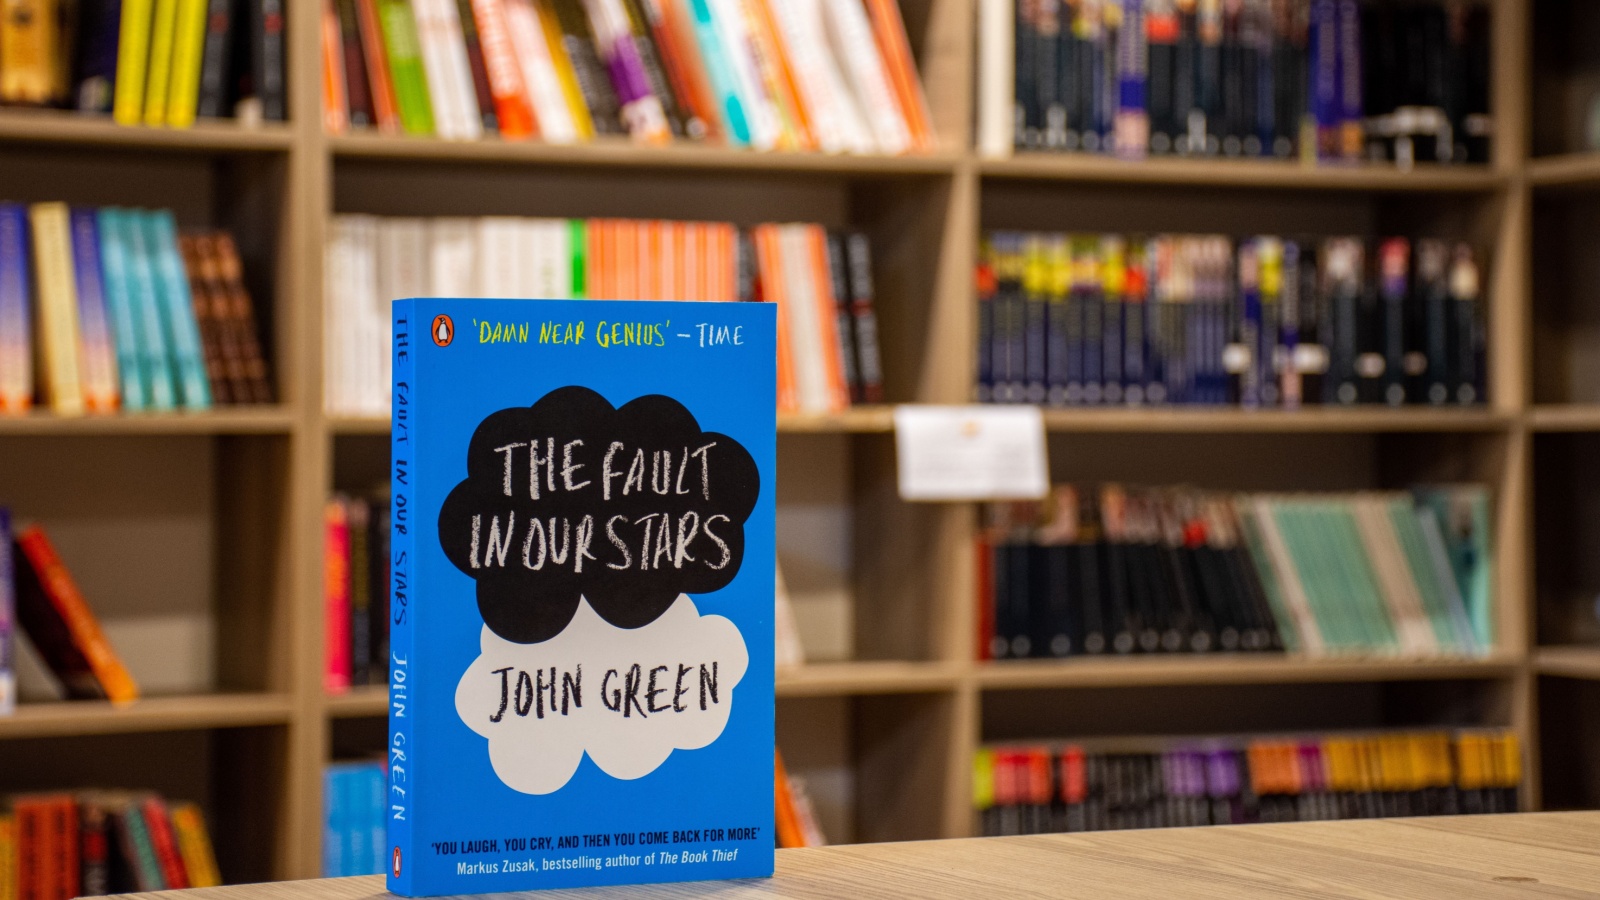 image credit: hamdi bendali/Shutterstock <p>Based on John Green’s novel, “The Fault in Our Stars” is a gut-wrenching tale of two young cancer patients who fall in love, knowing that their time together is limited. The raw and genuine portrayals by Shailene Woodley and Ansel Elgort capture the beauty and tragedy of their story, making every moment count. This film not only tugs at heartstrings but also inspires a celebration of life.</p>